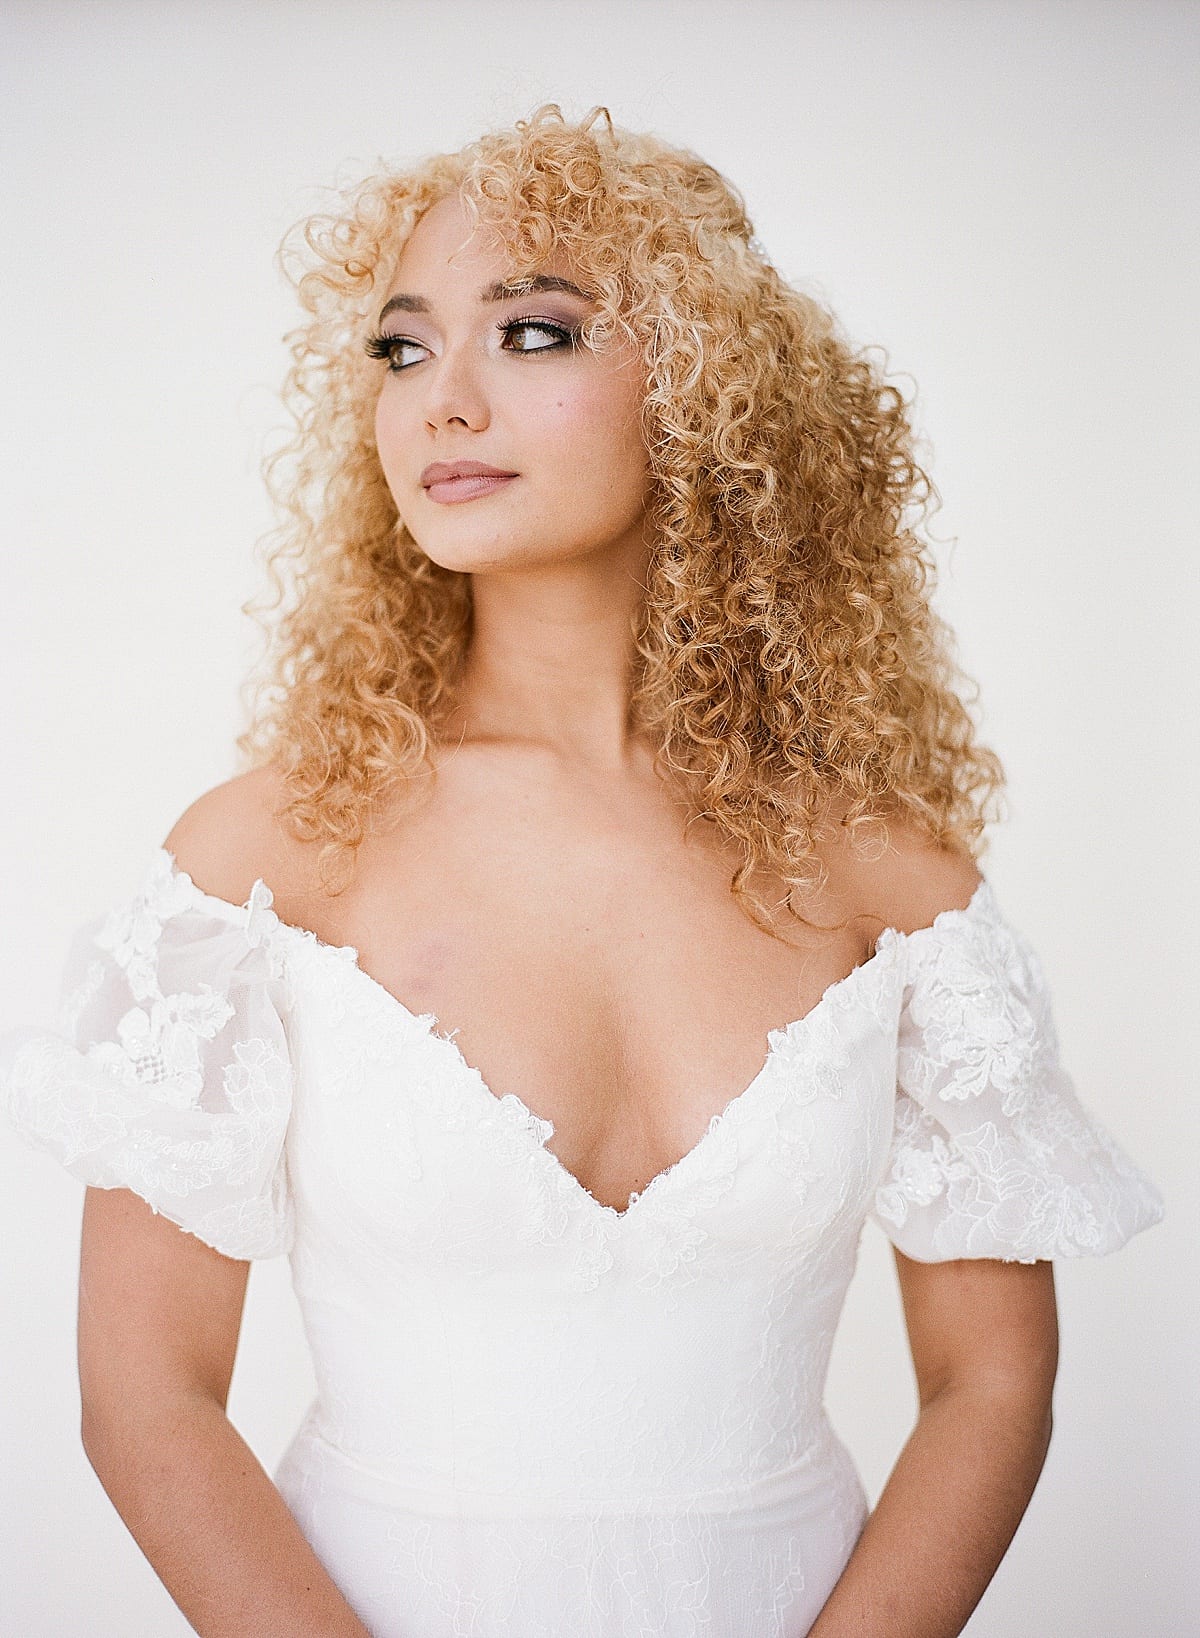 Bride with Curly Hair Looking Off Photo 